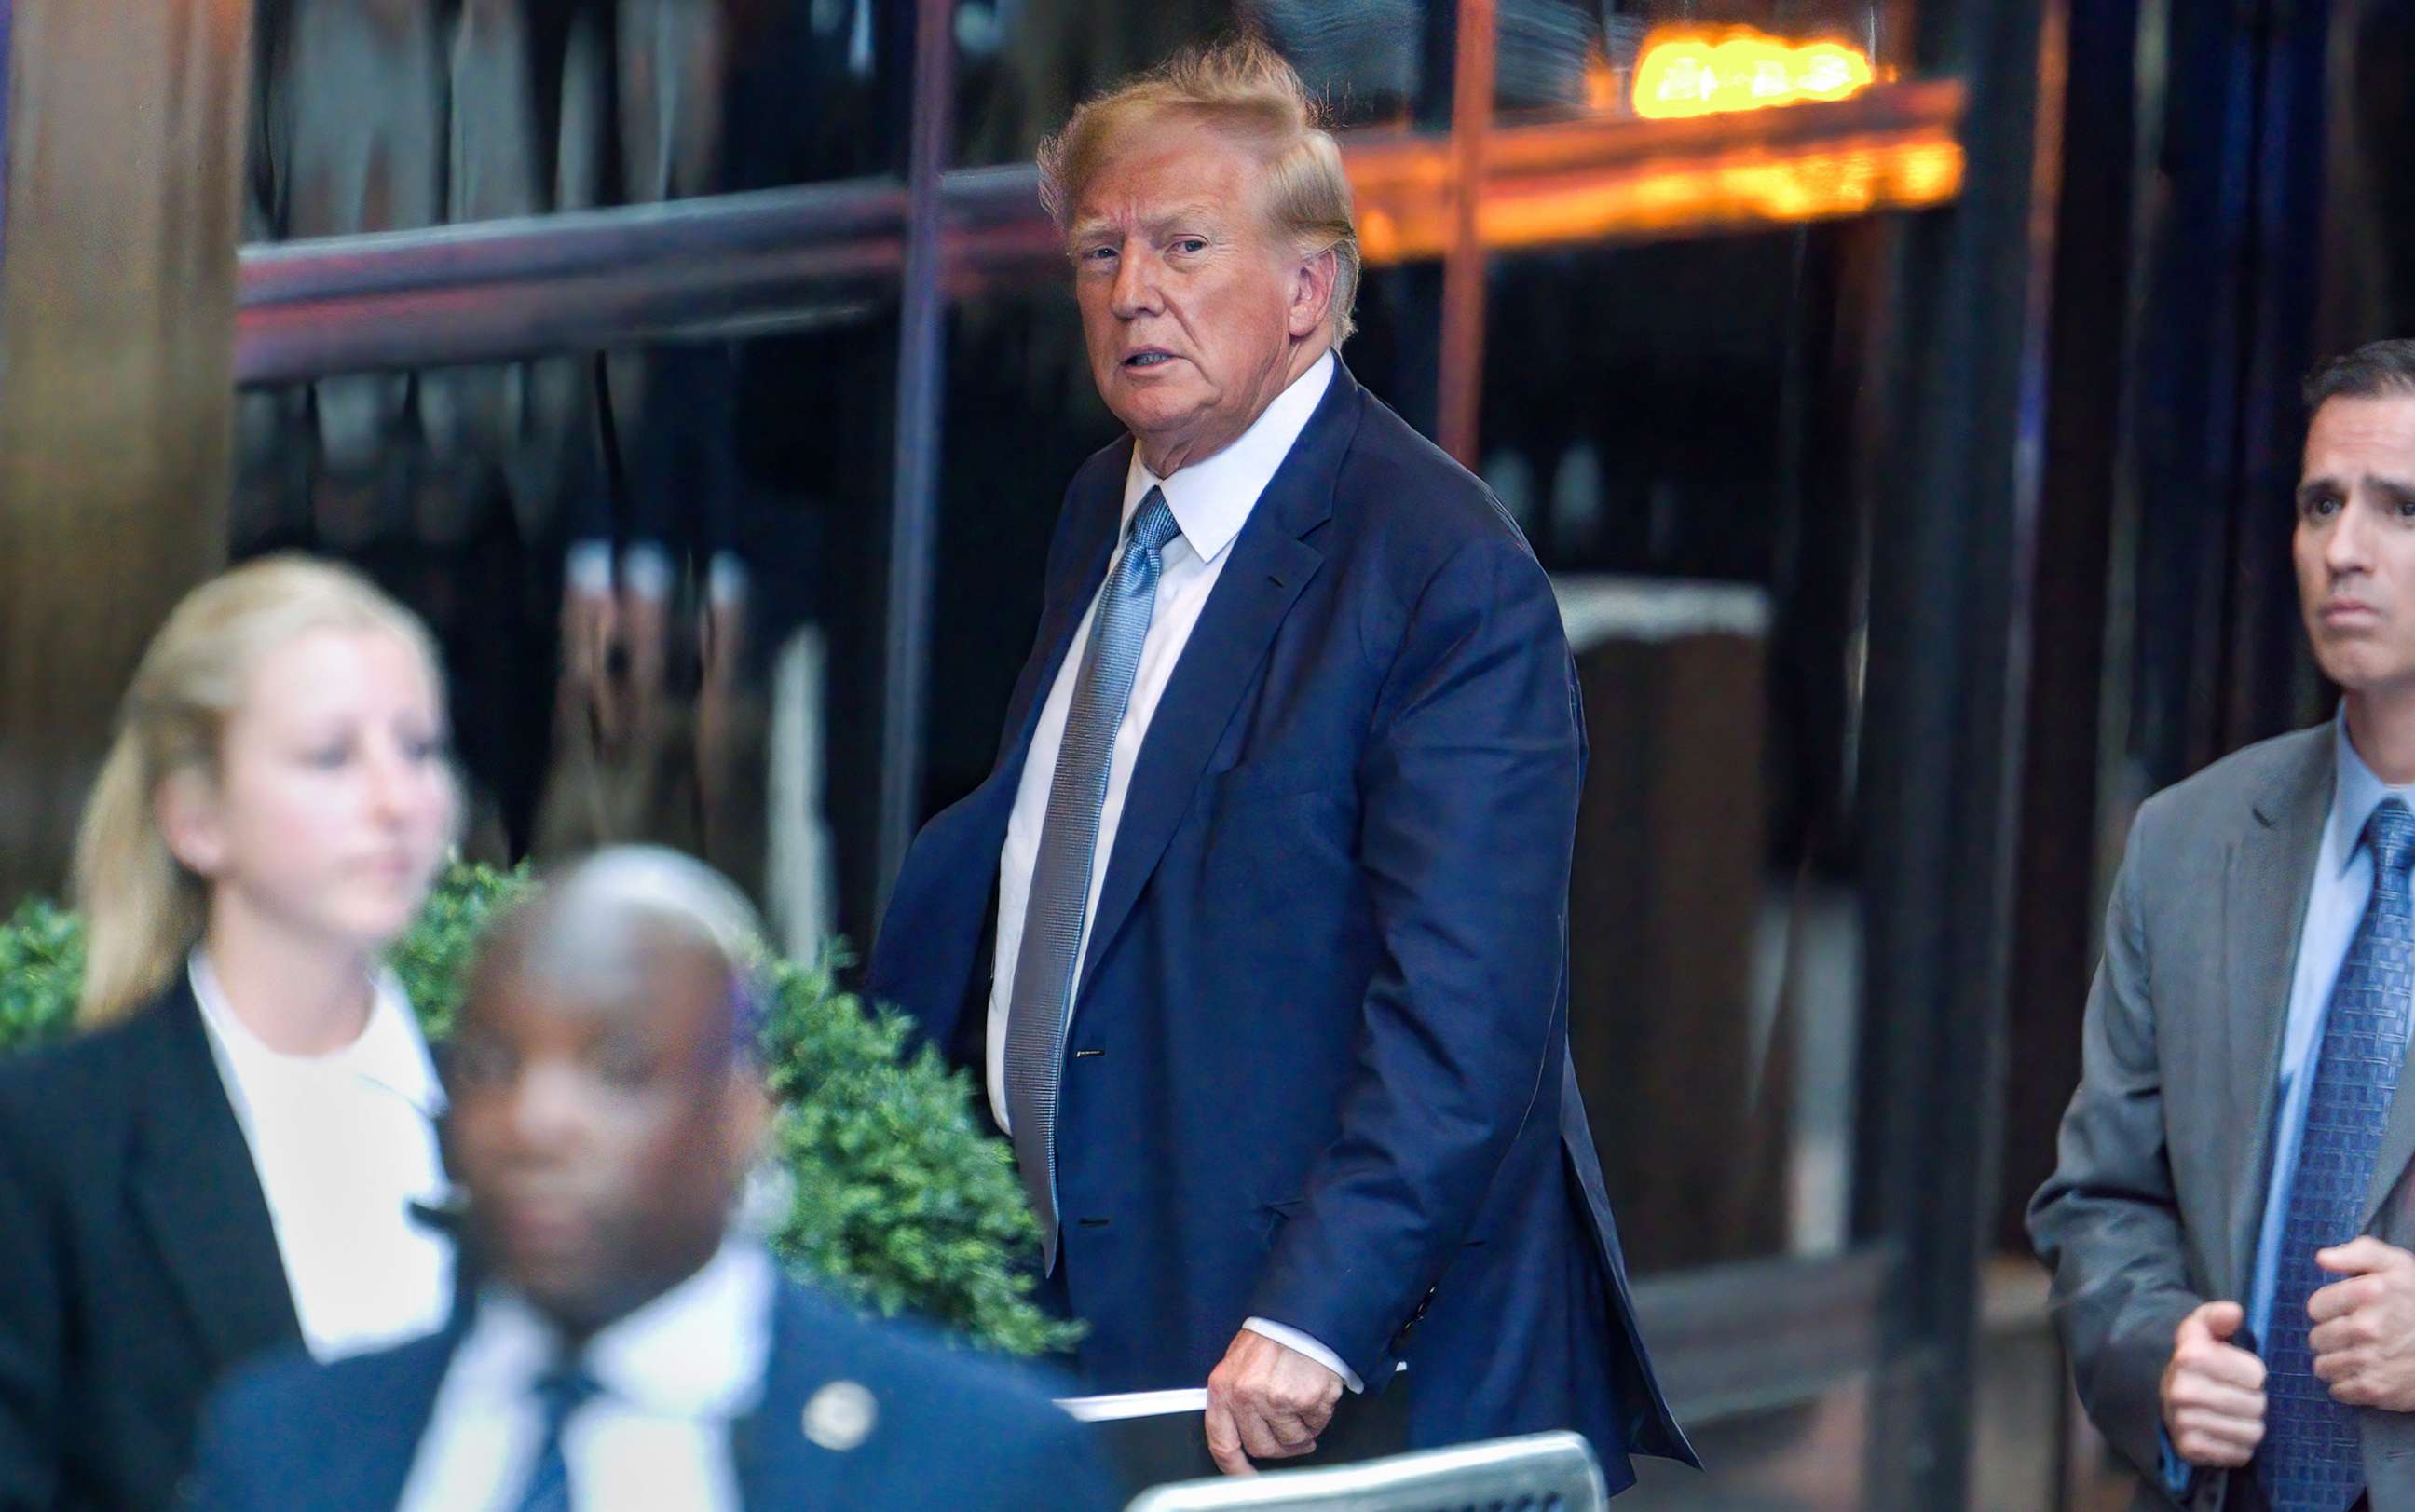 PHOTO: Former President Donald Trump arrives to Trump Tower, April 13, 2023 in New York City.